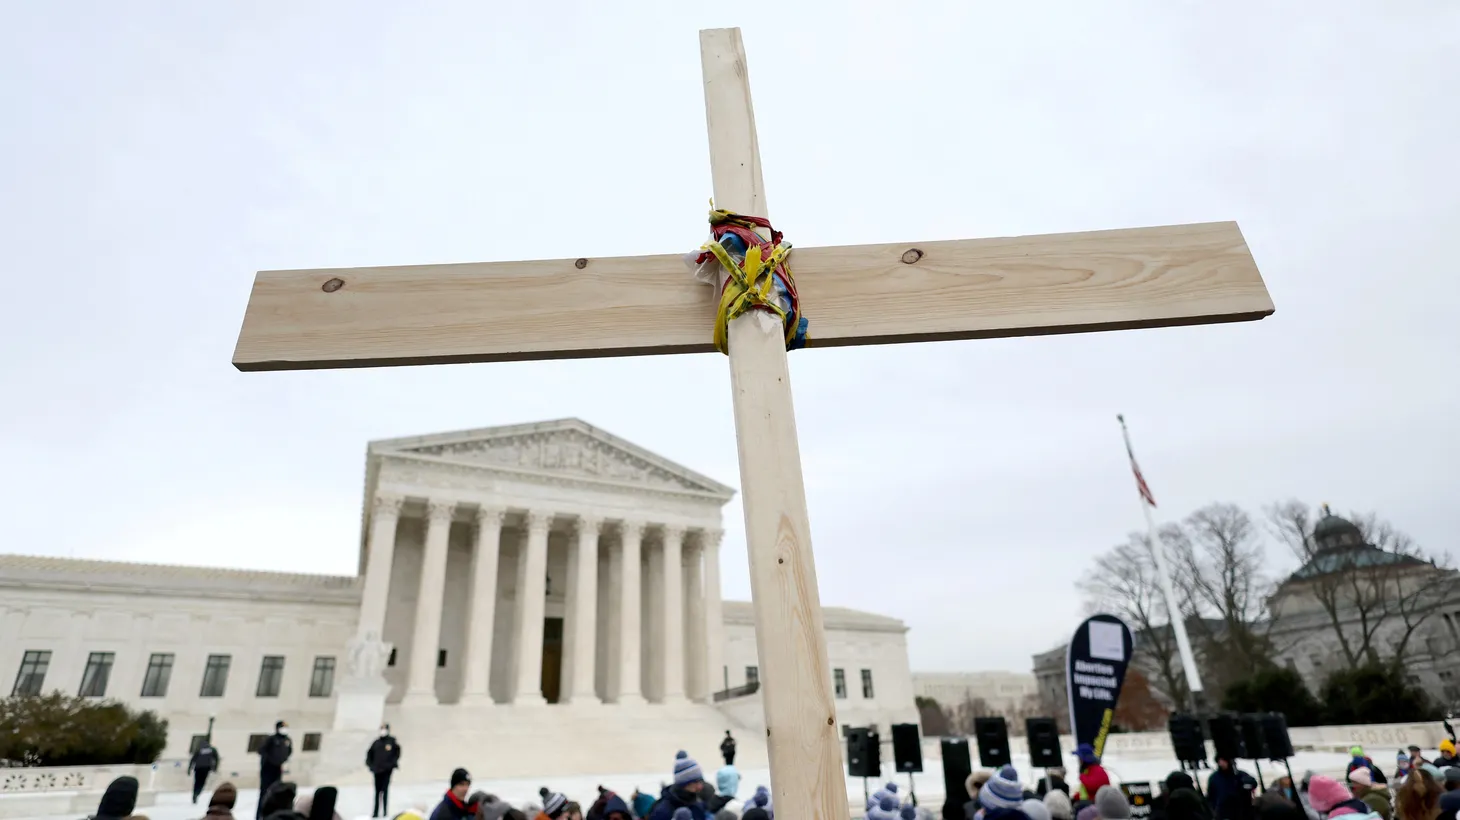 Activists hold a cross in front of the U.S. Supreme Court building in Washington, U.S., January 21, 2022.